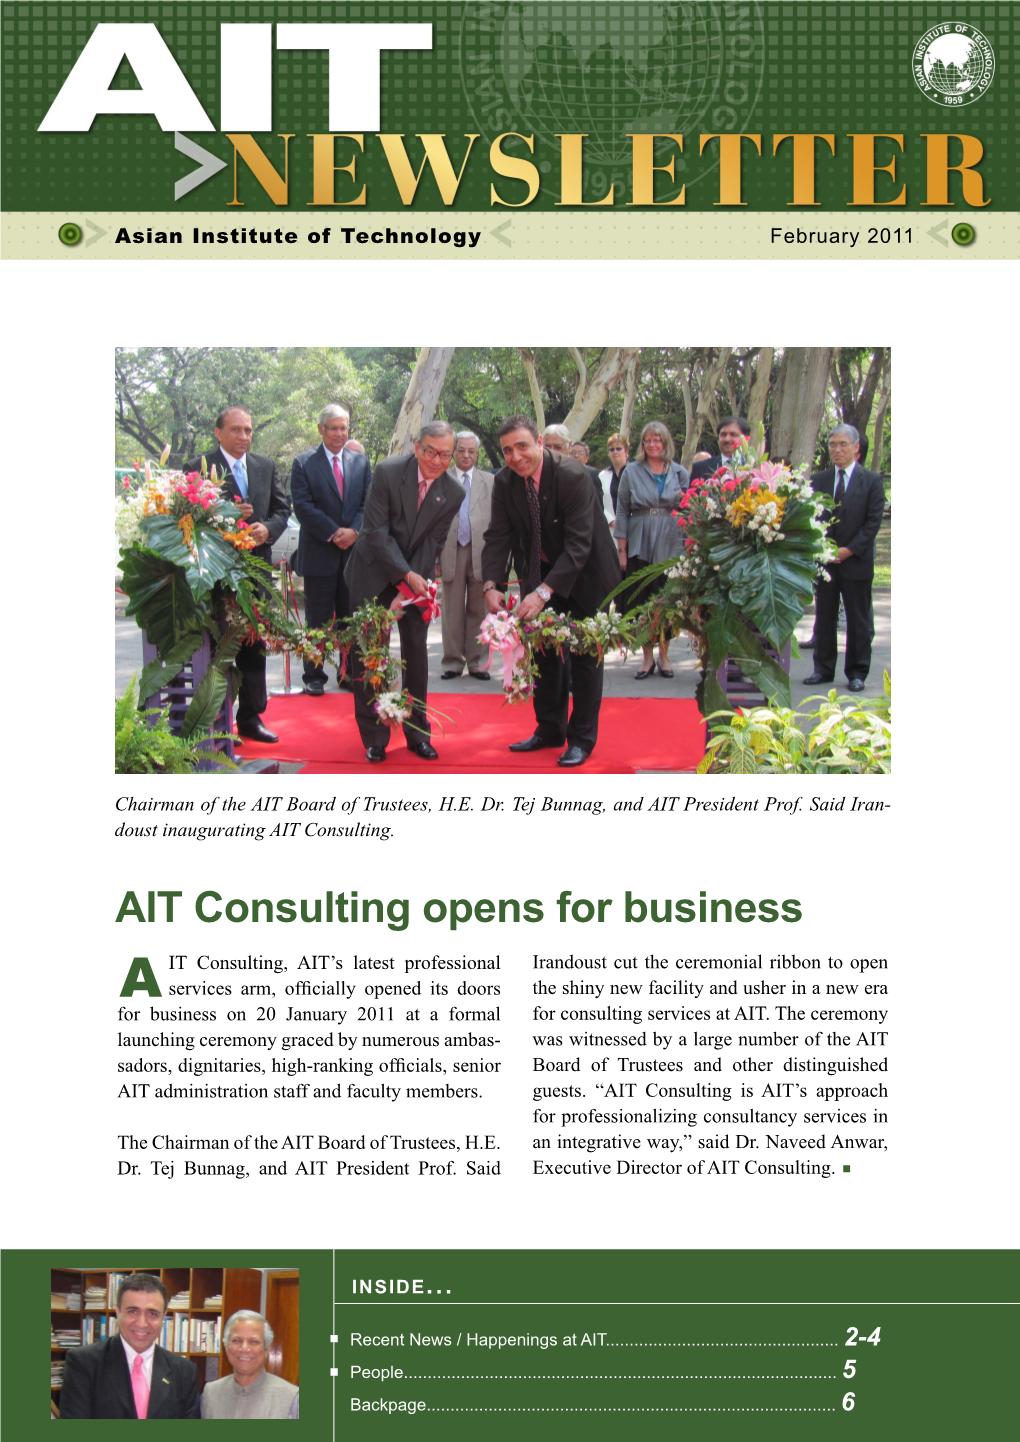 AIT Consulting Opens for Business